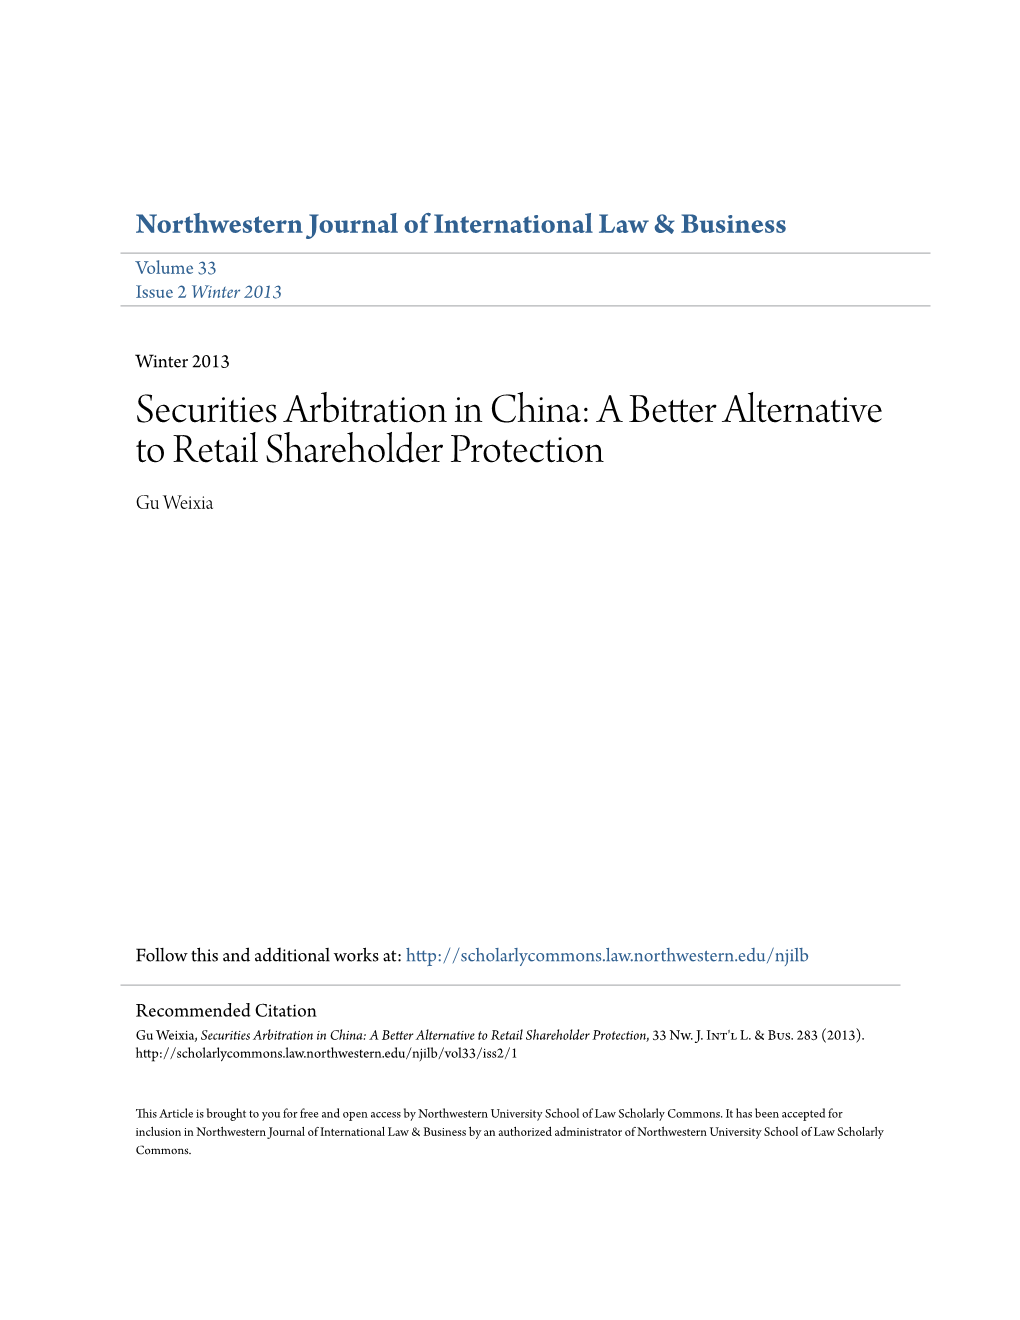 Securities Arbitration in China: a Better Alternative to Retail Shareholder Protection Gu Weixia